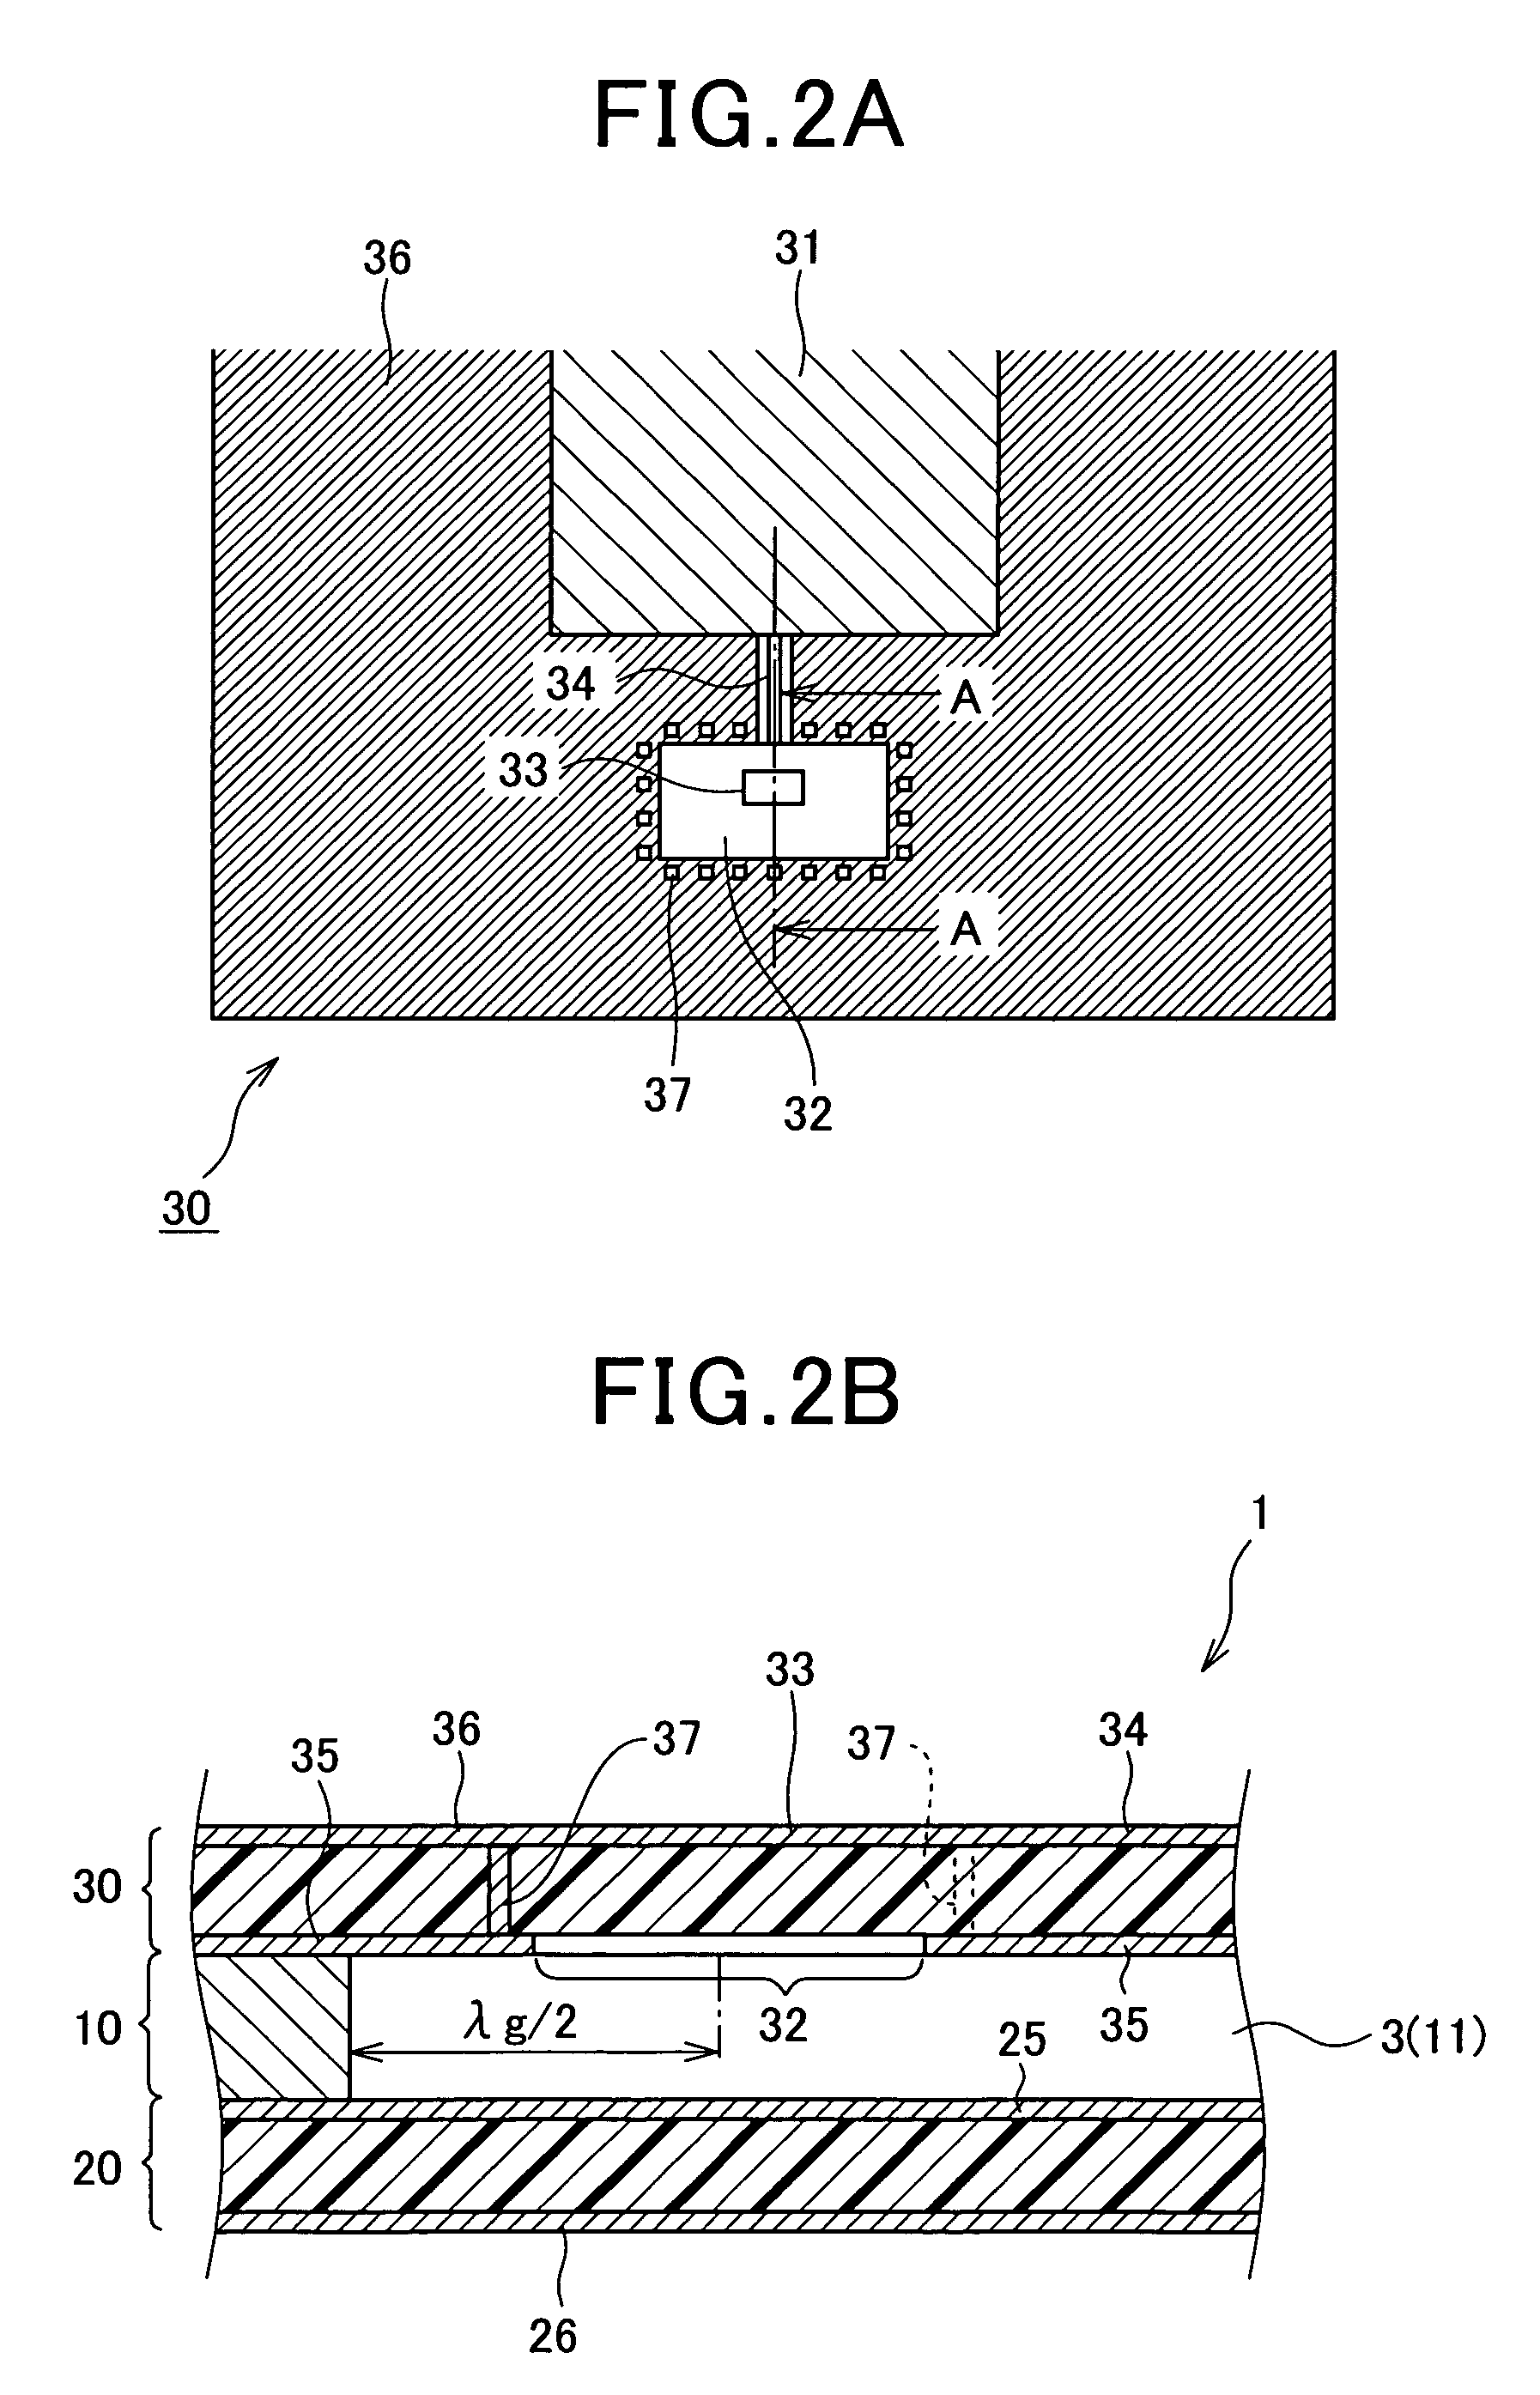 High frequency device equipped with rectangular waveguide